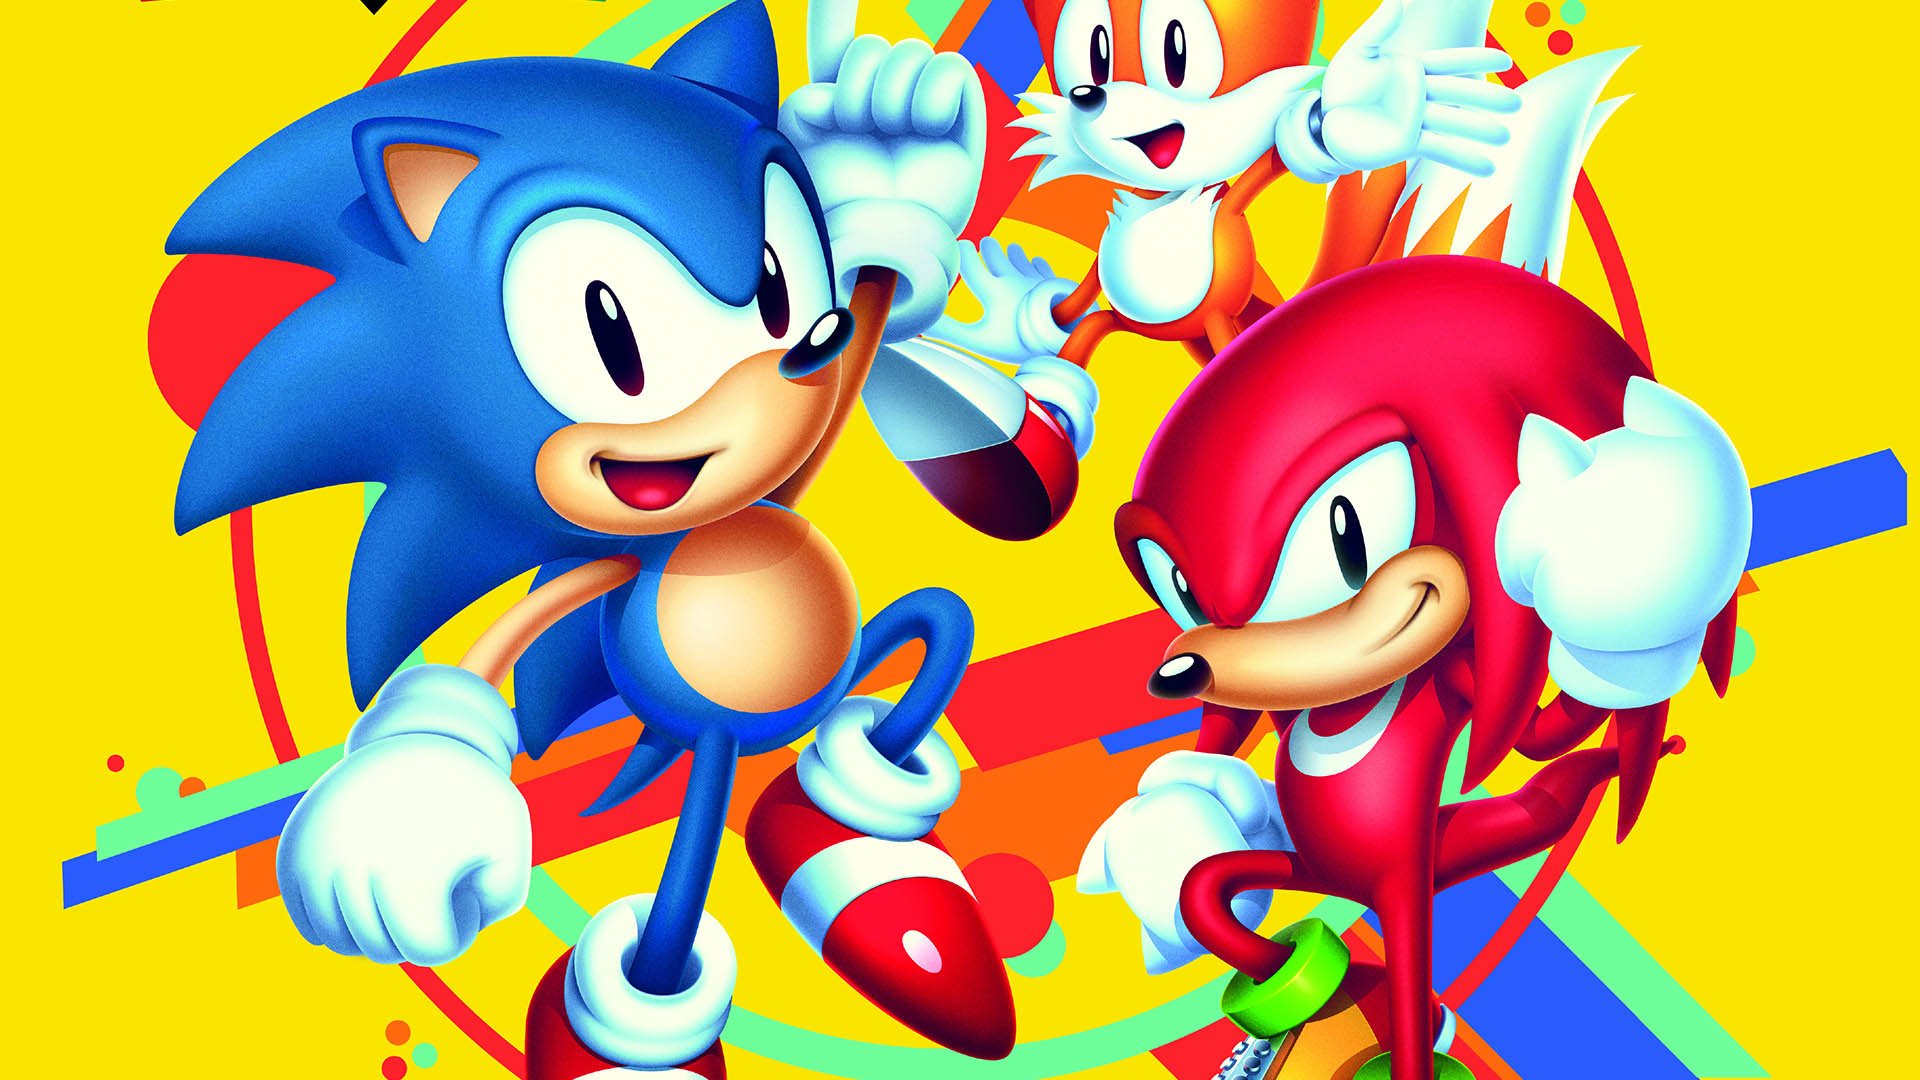 sonic mania 1.03.0919 cracked patch